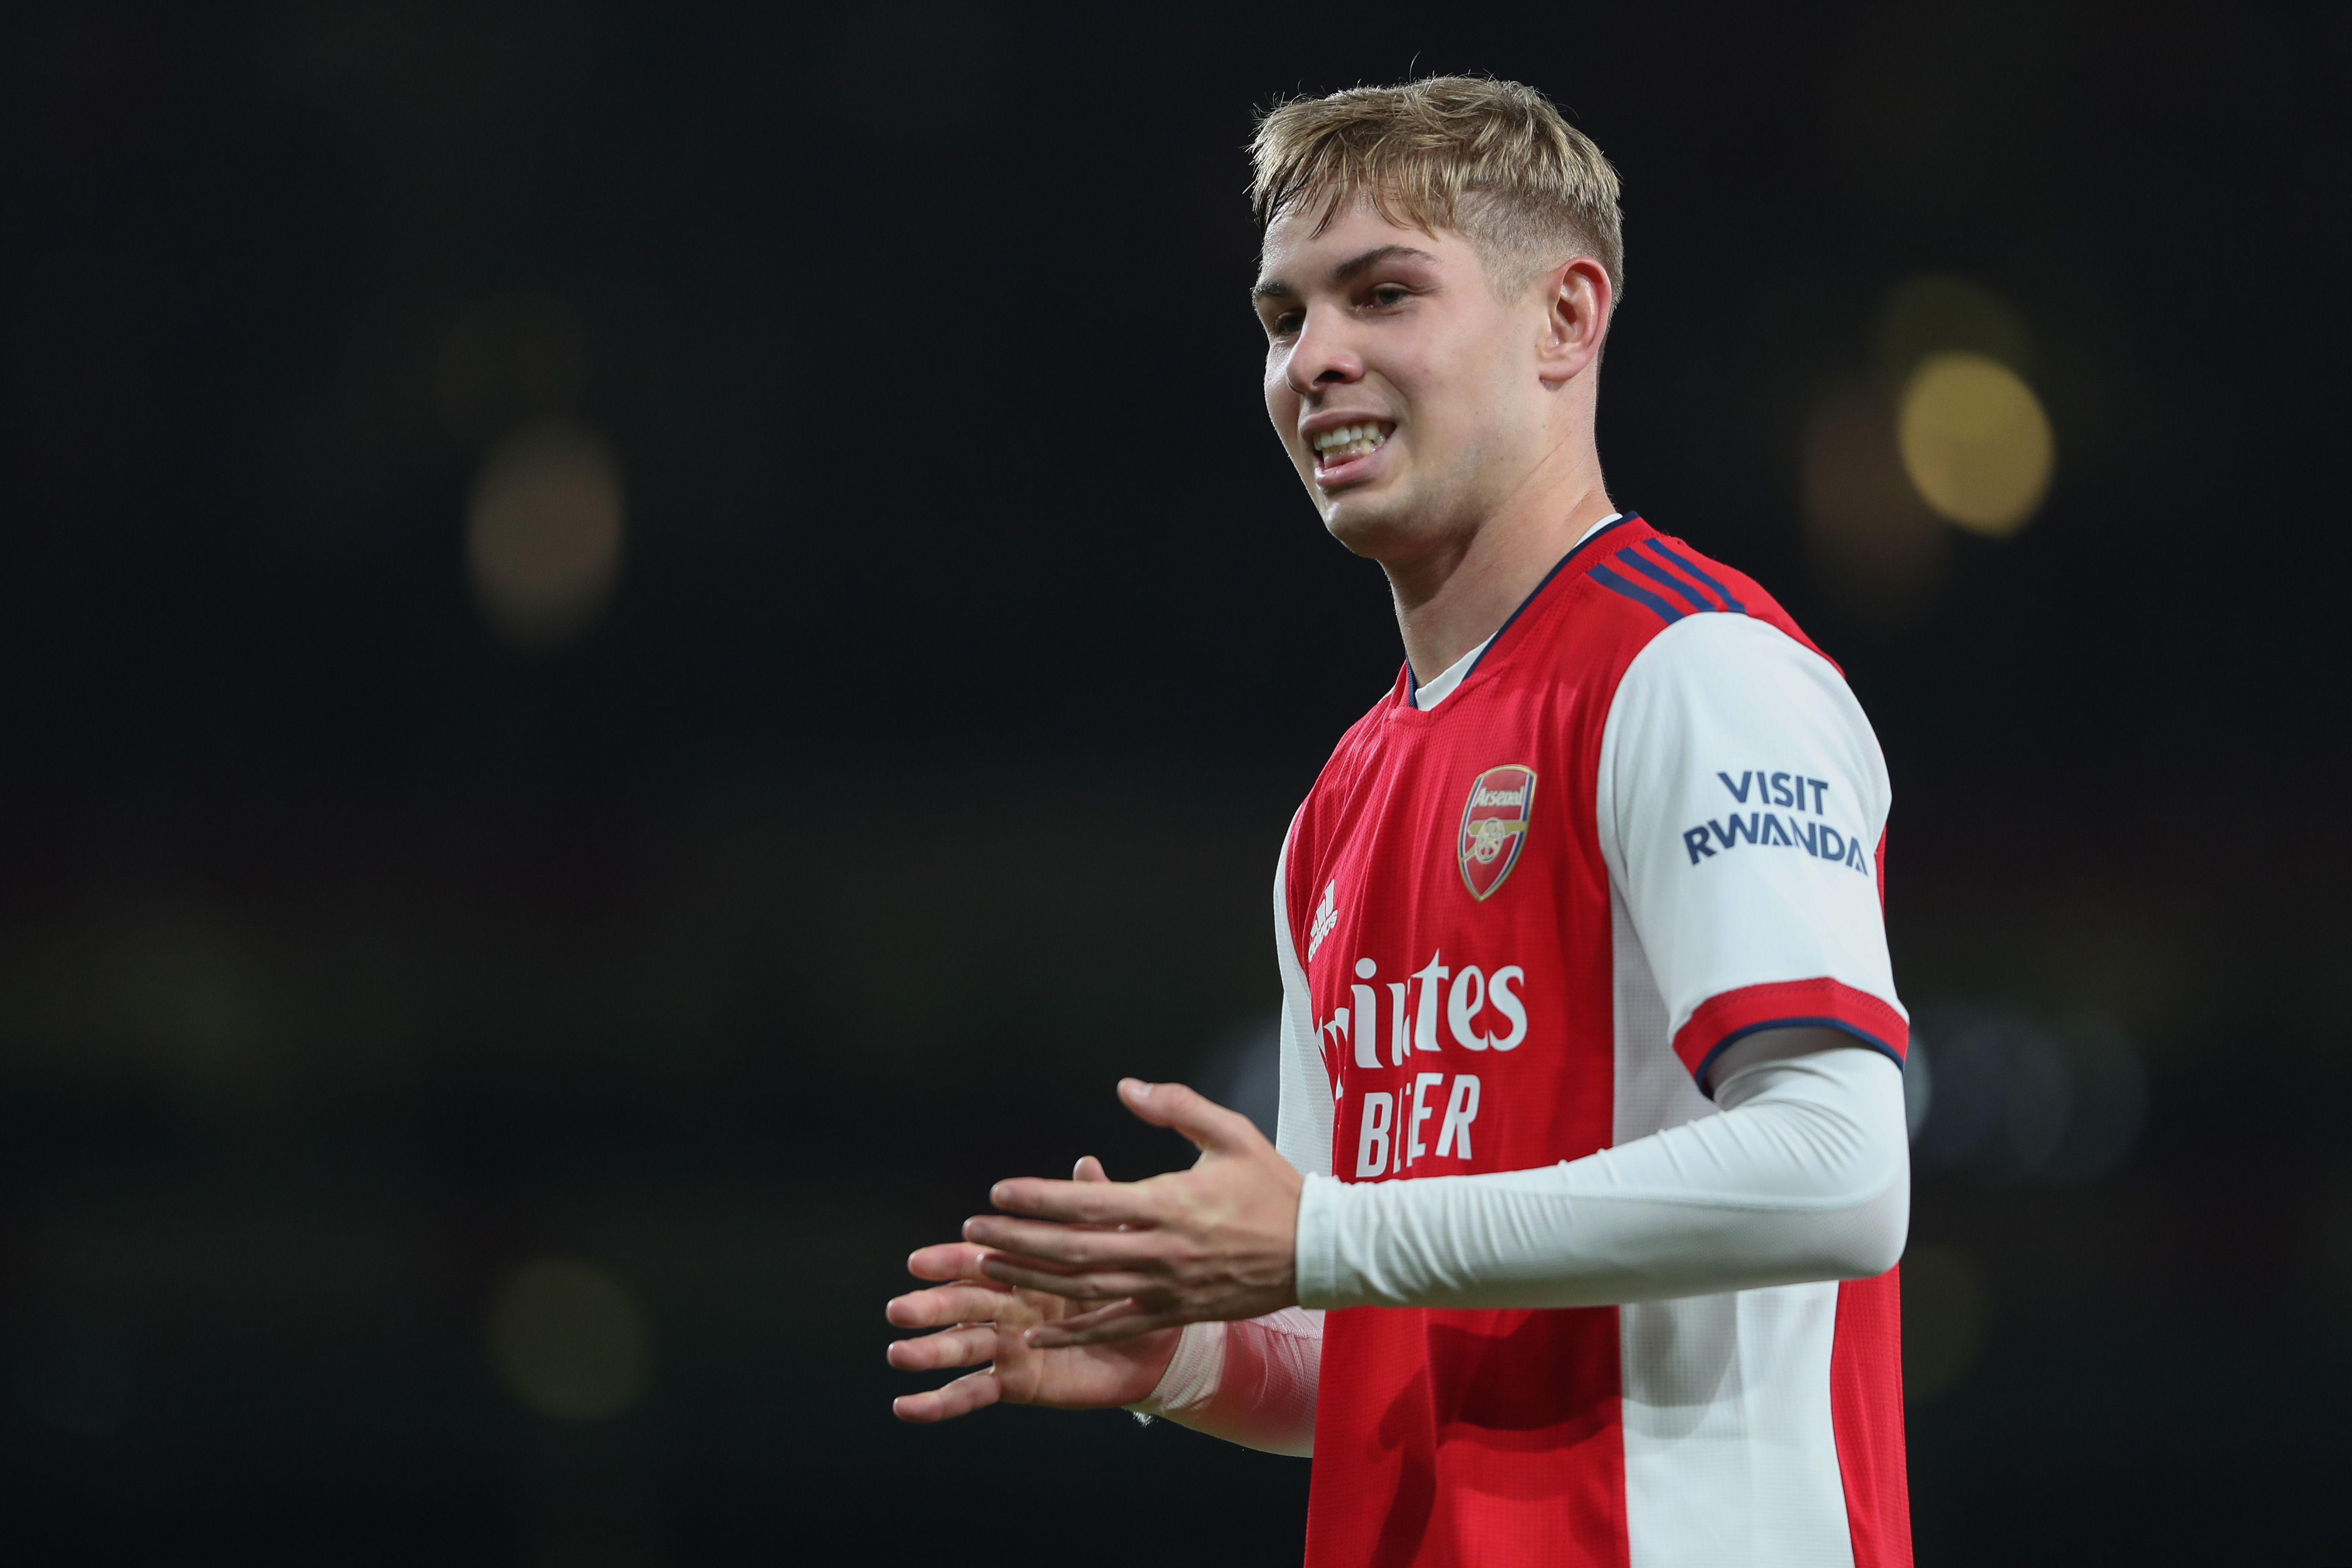 Emile Smith Rowe called up by England after impressive Arsenal form